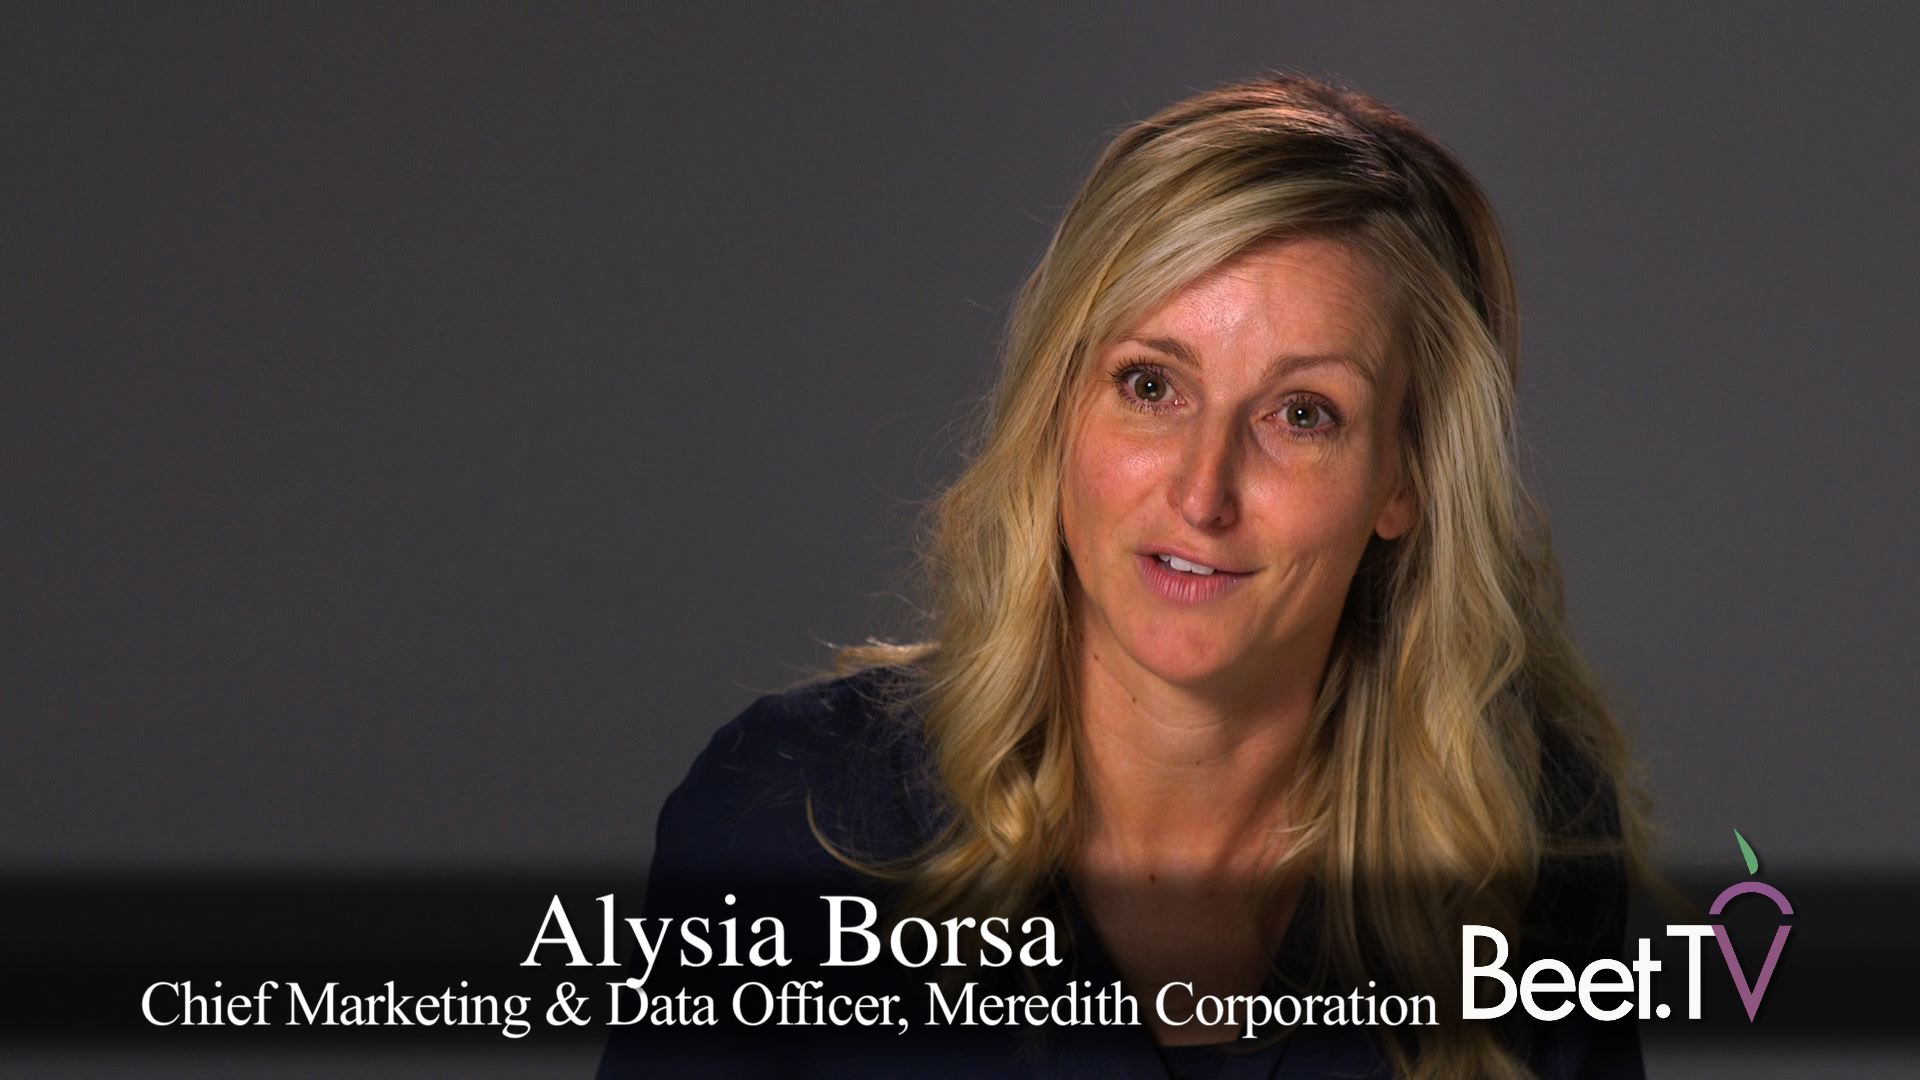 At Meredith Corporation, Data Is Powerless Without The ‘So What?’